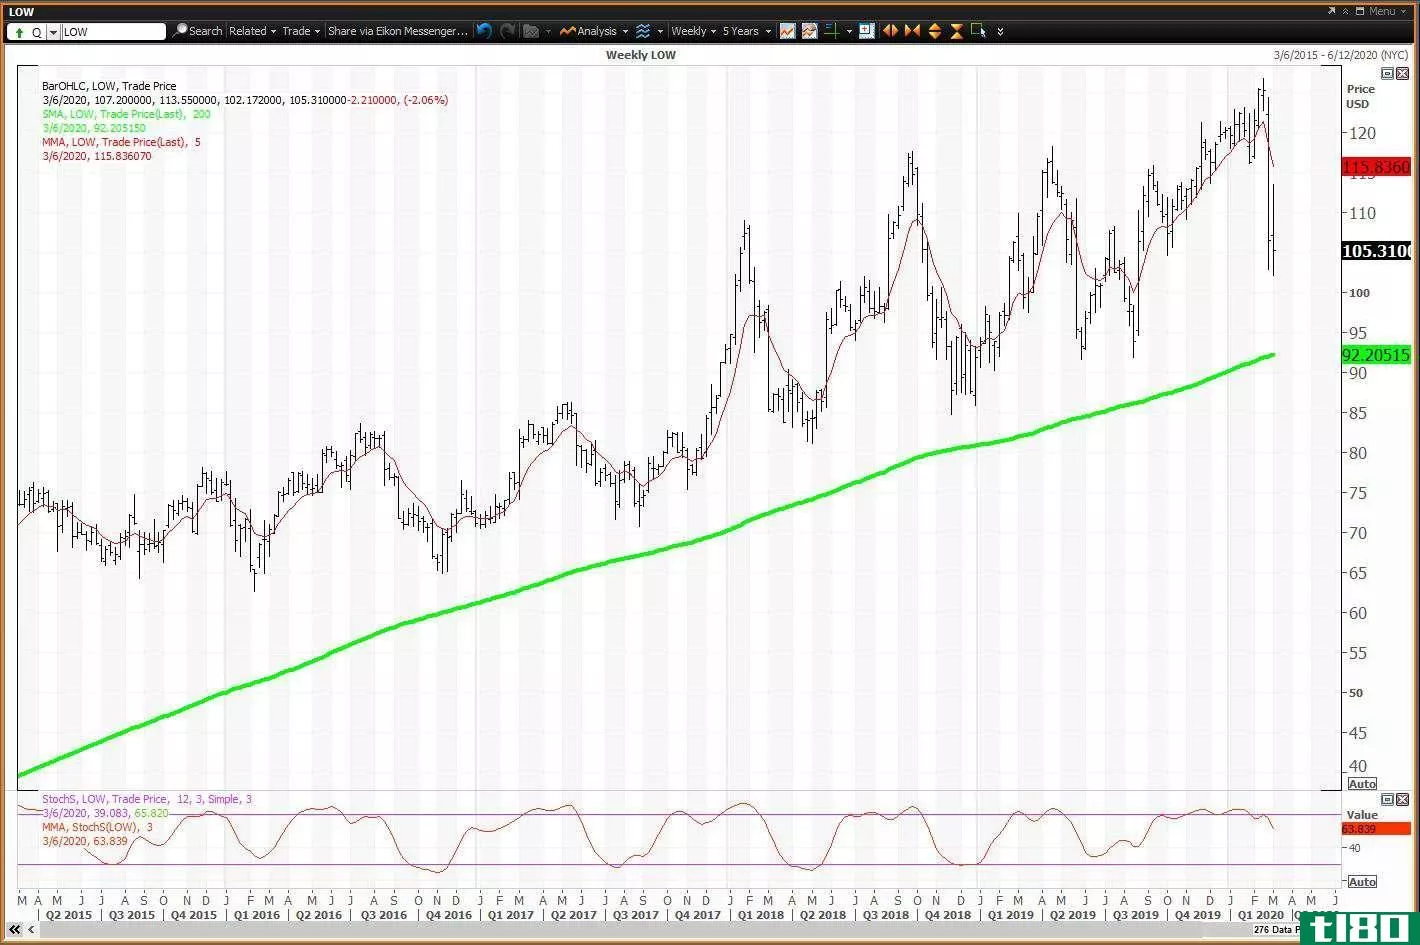 Weekly chart showing the share price performance of Lowe's Companies, Inc. (LOW)